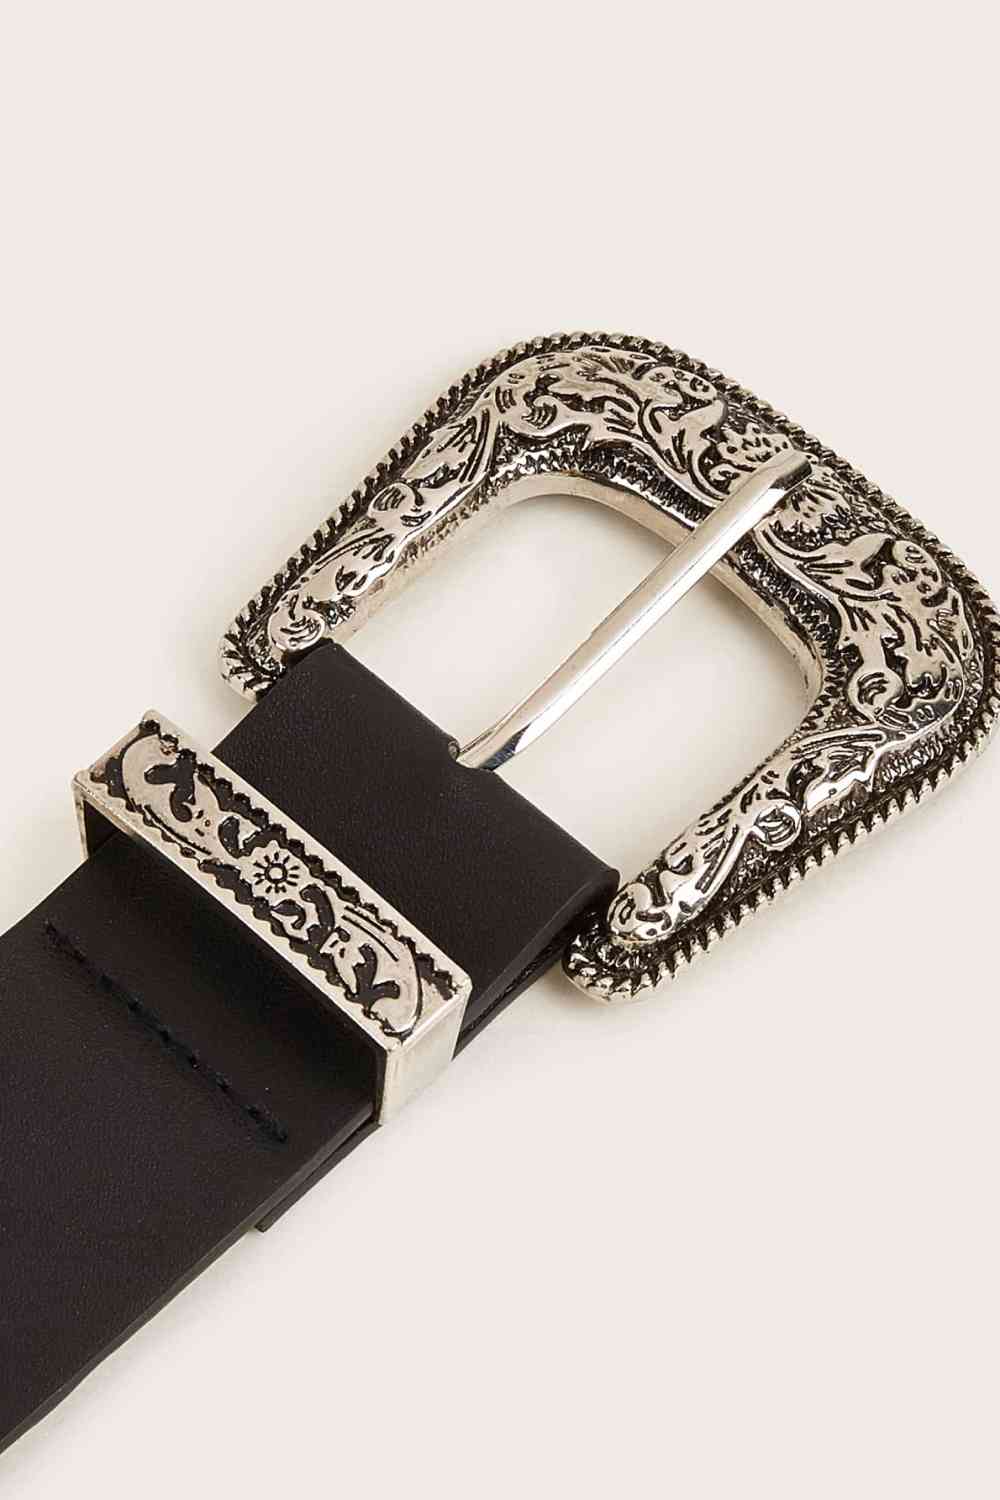 Dark Slate Gray Double Row Studded PU Leather Belt Sentient Beauty Fashions Apparel & Accessories